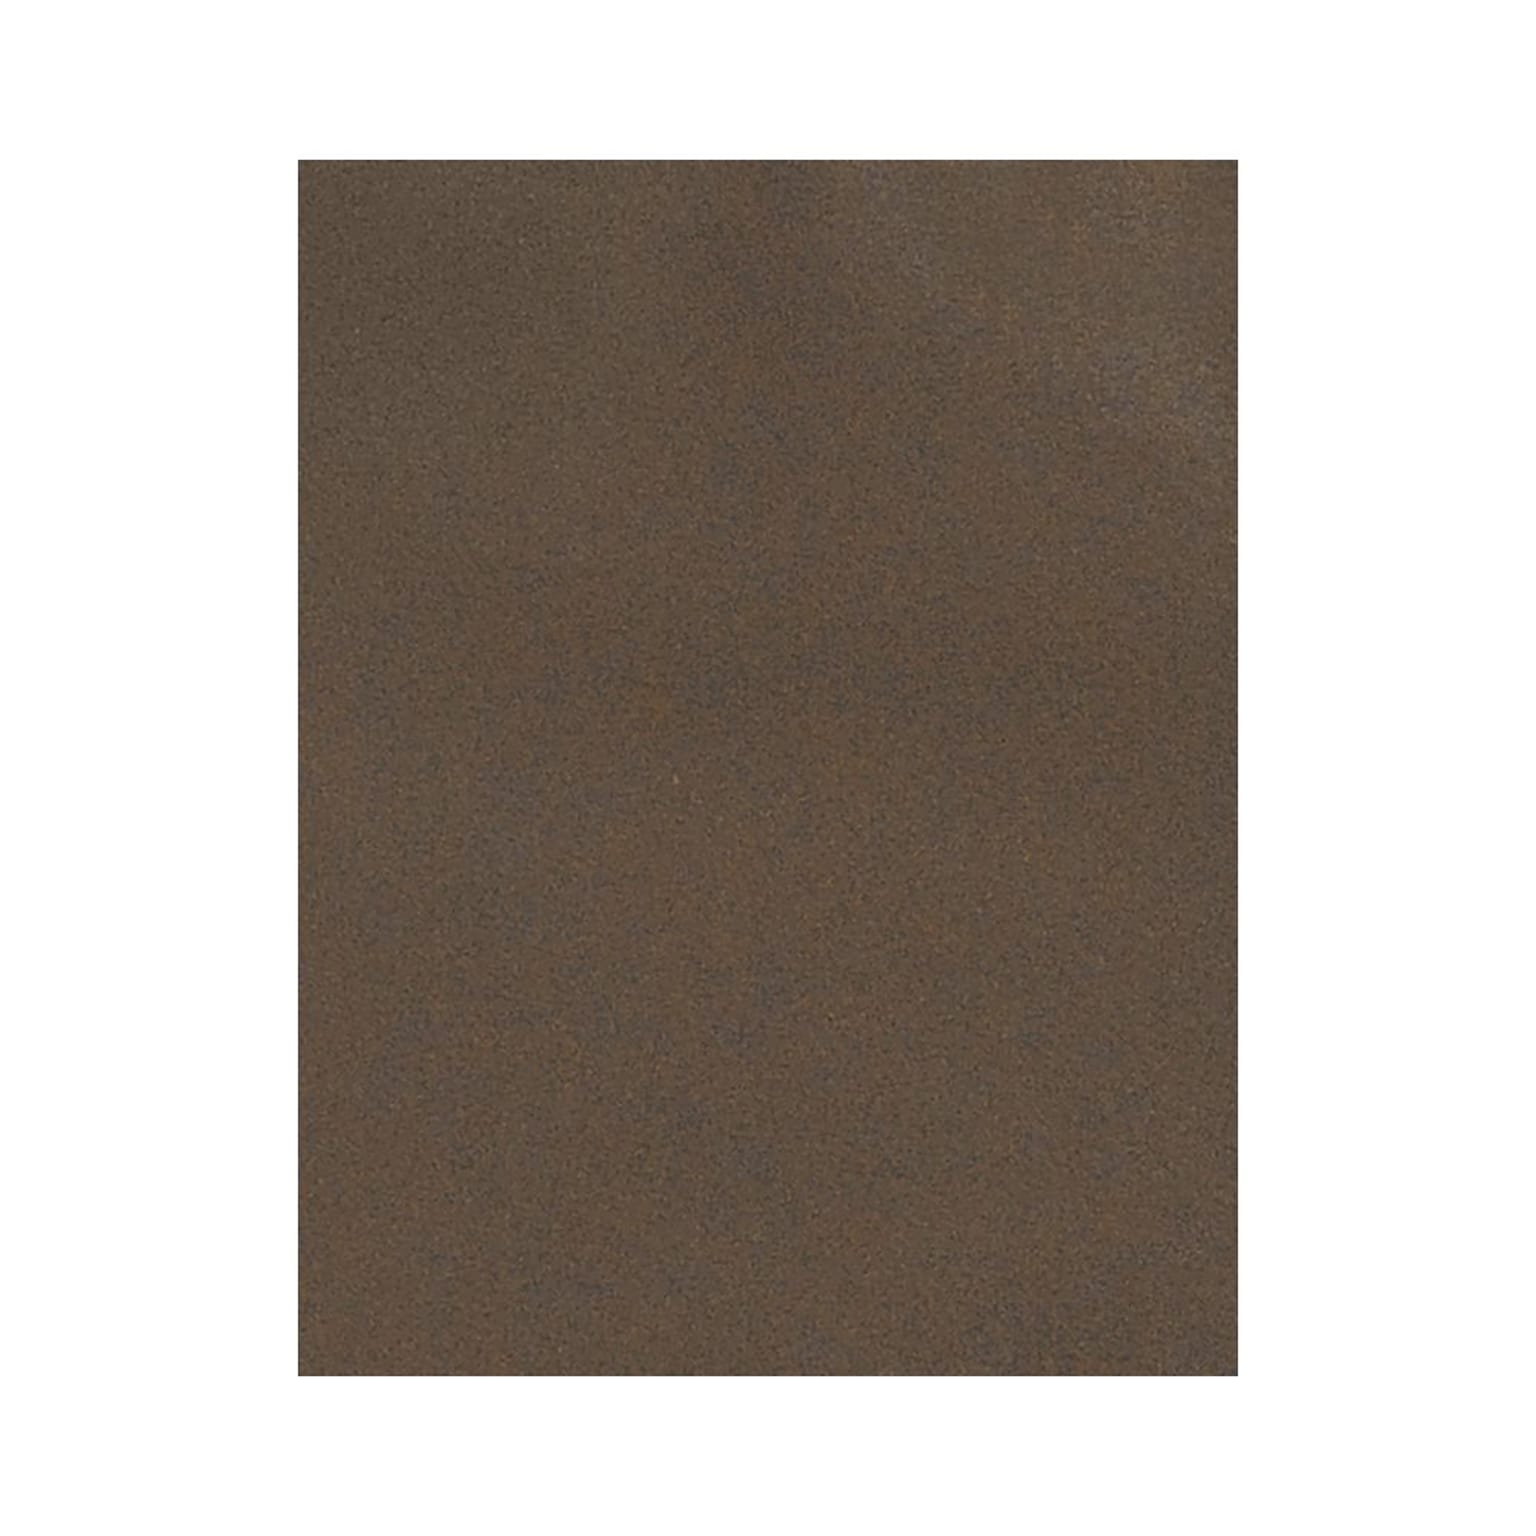 LUX Colored Paper, 32 lbs., 8.5 x 11, Chocolate, 50 Sheets/Pack (81211-P-25-50)